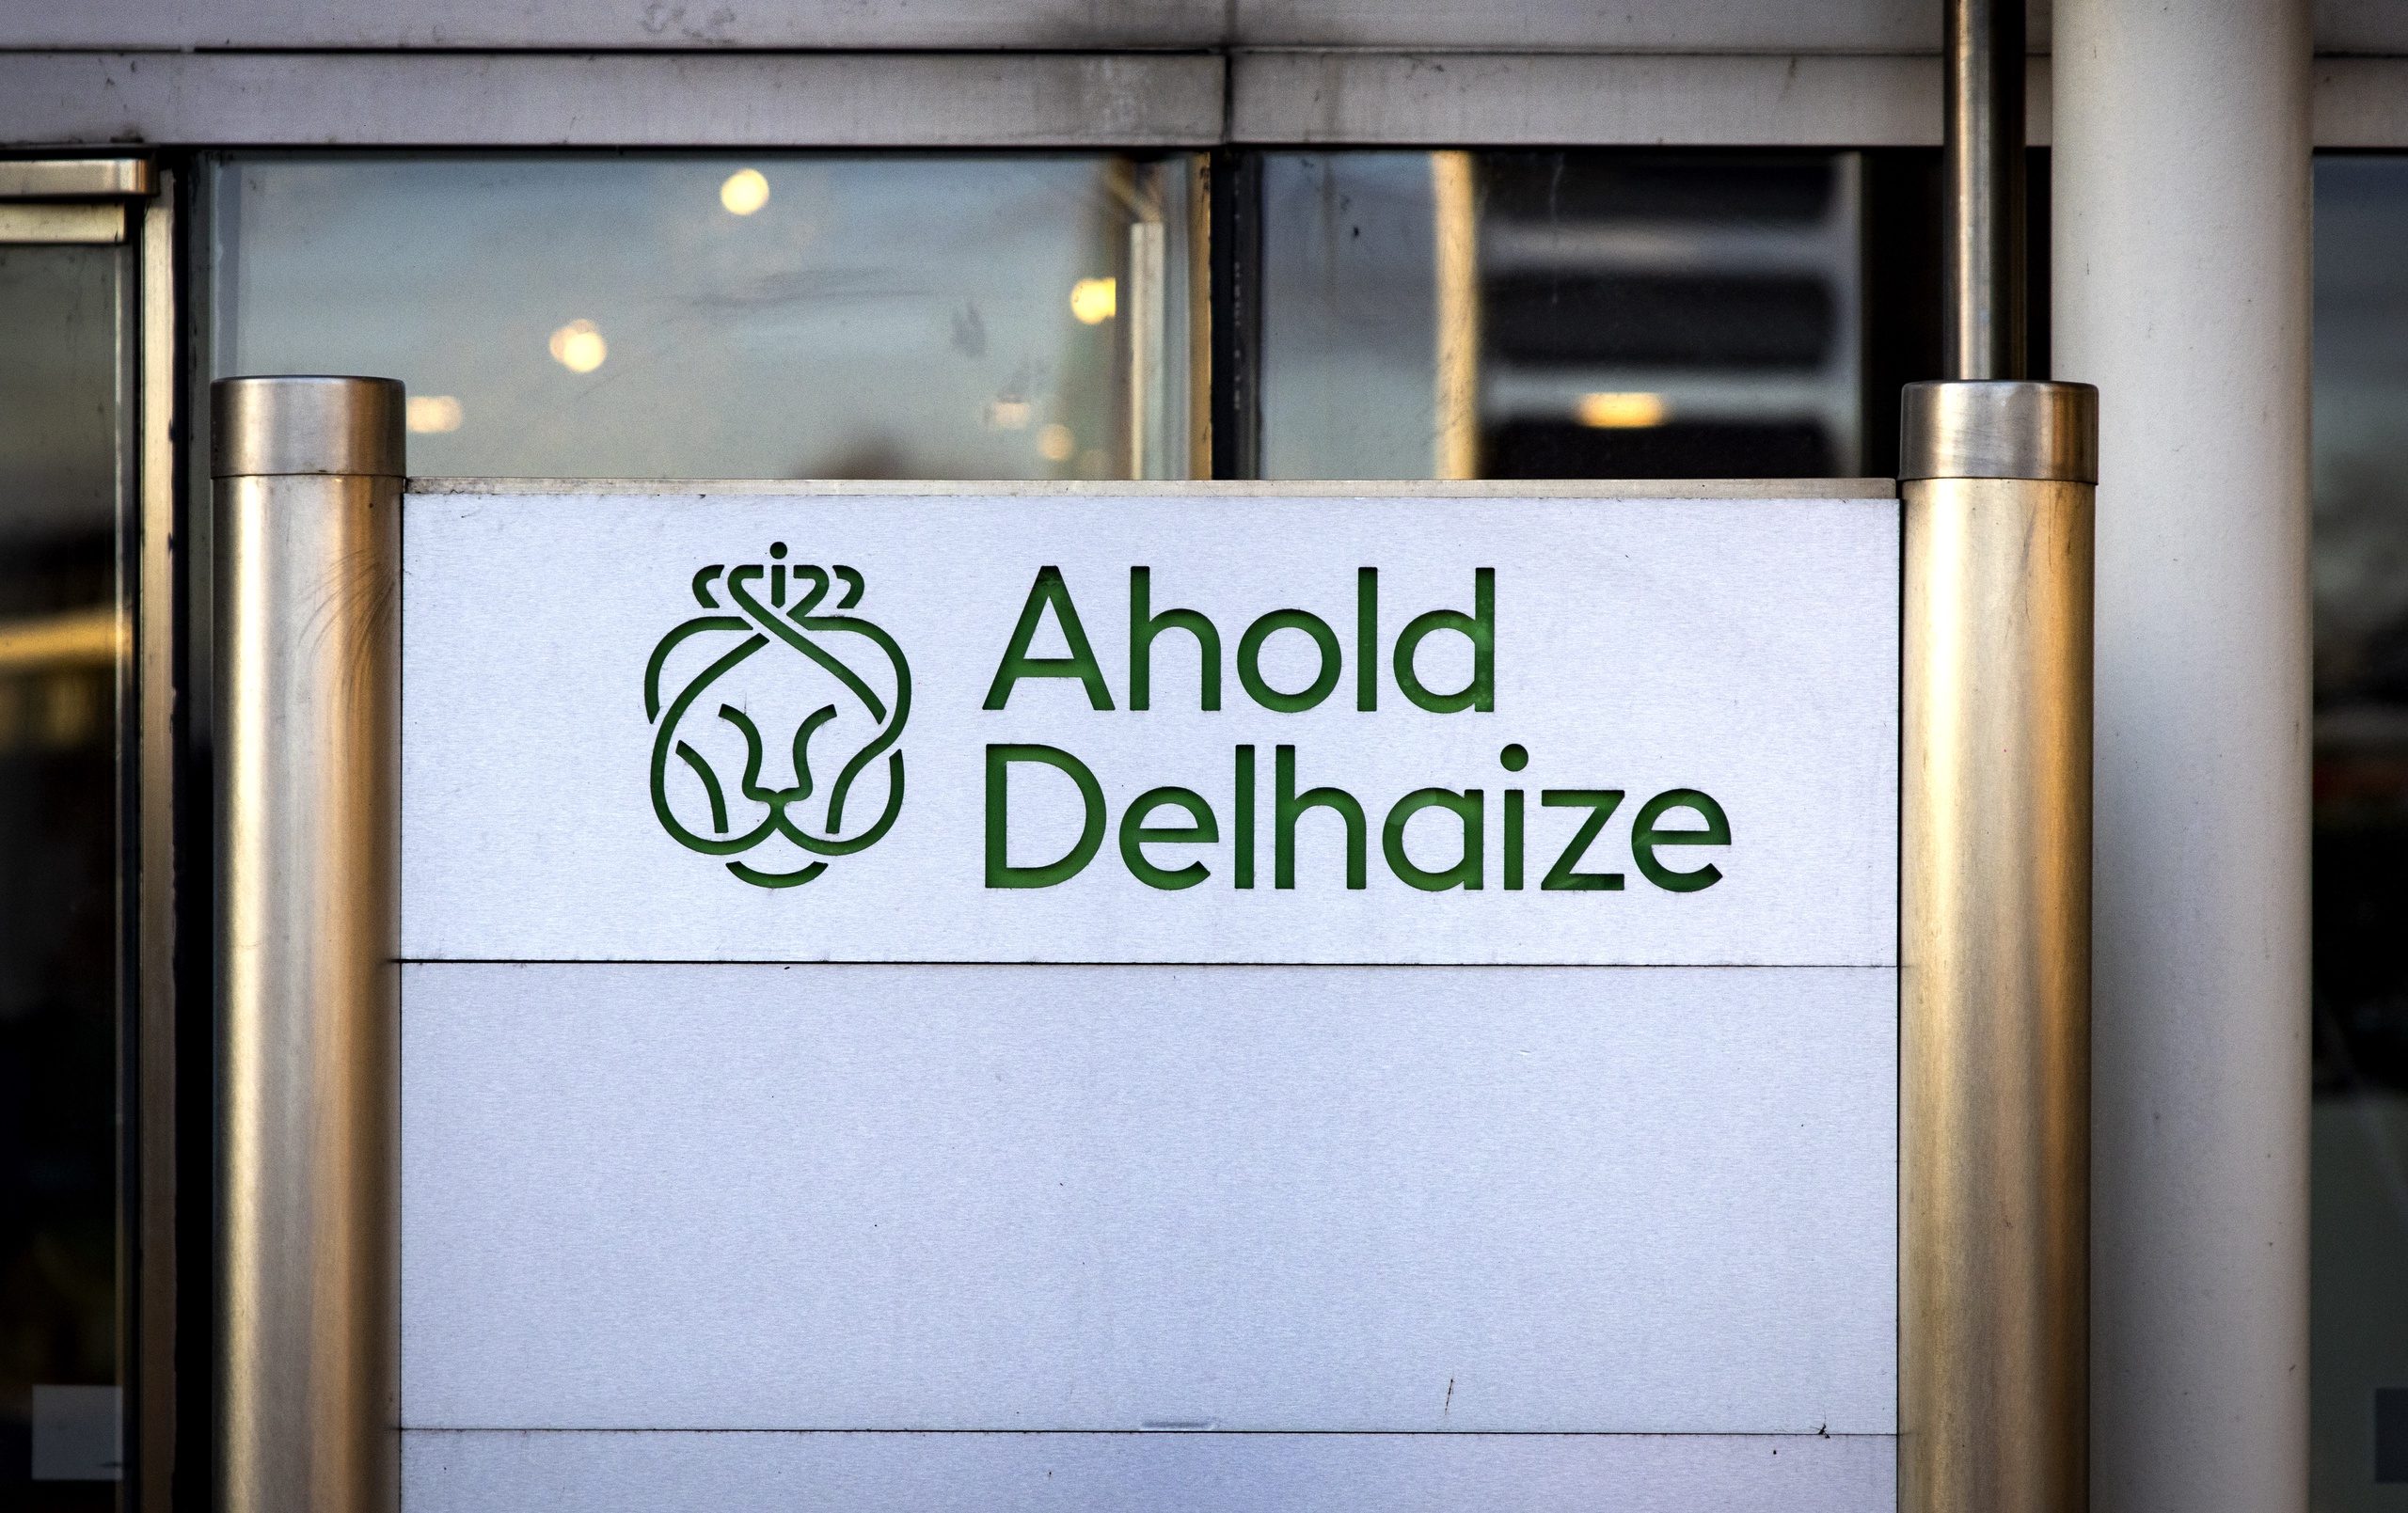 Turnover of Ahold Delhaize is increasing, but concerns remain dormant